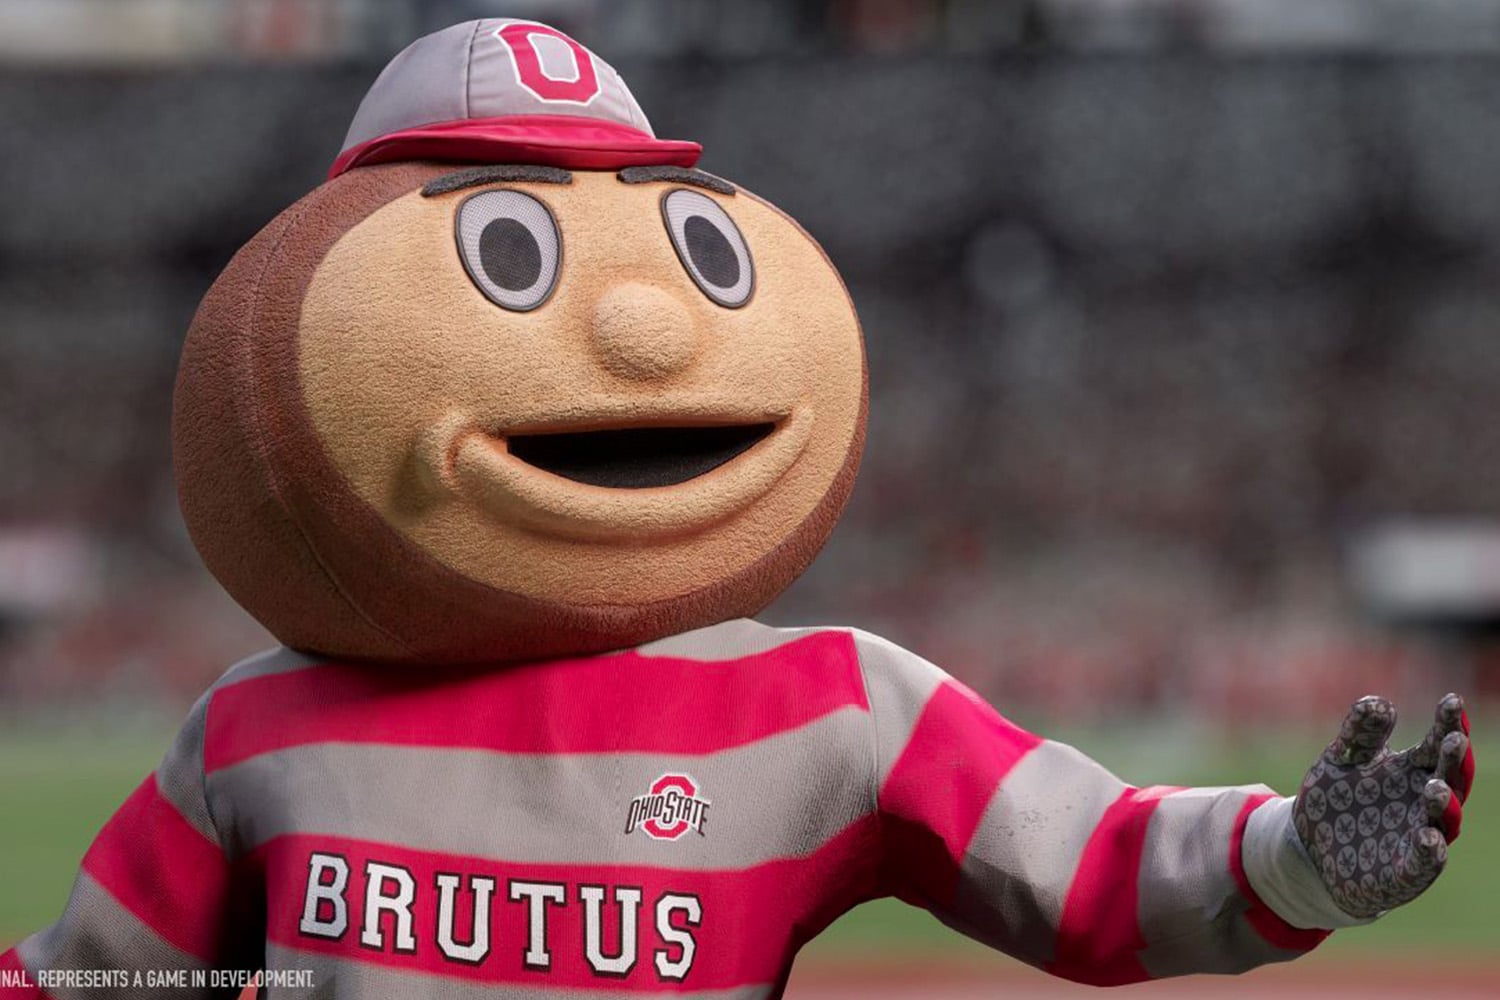 Ohio State mascot Brutus on sideline of college football game